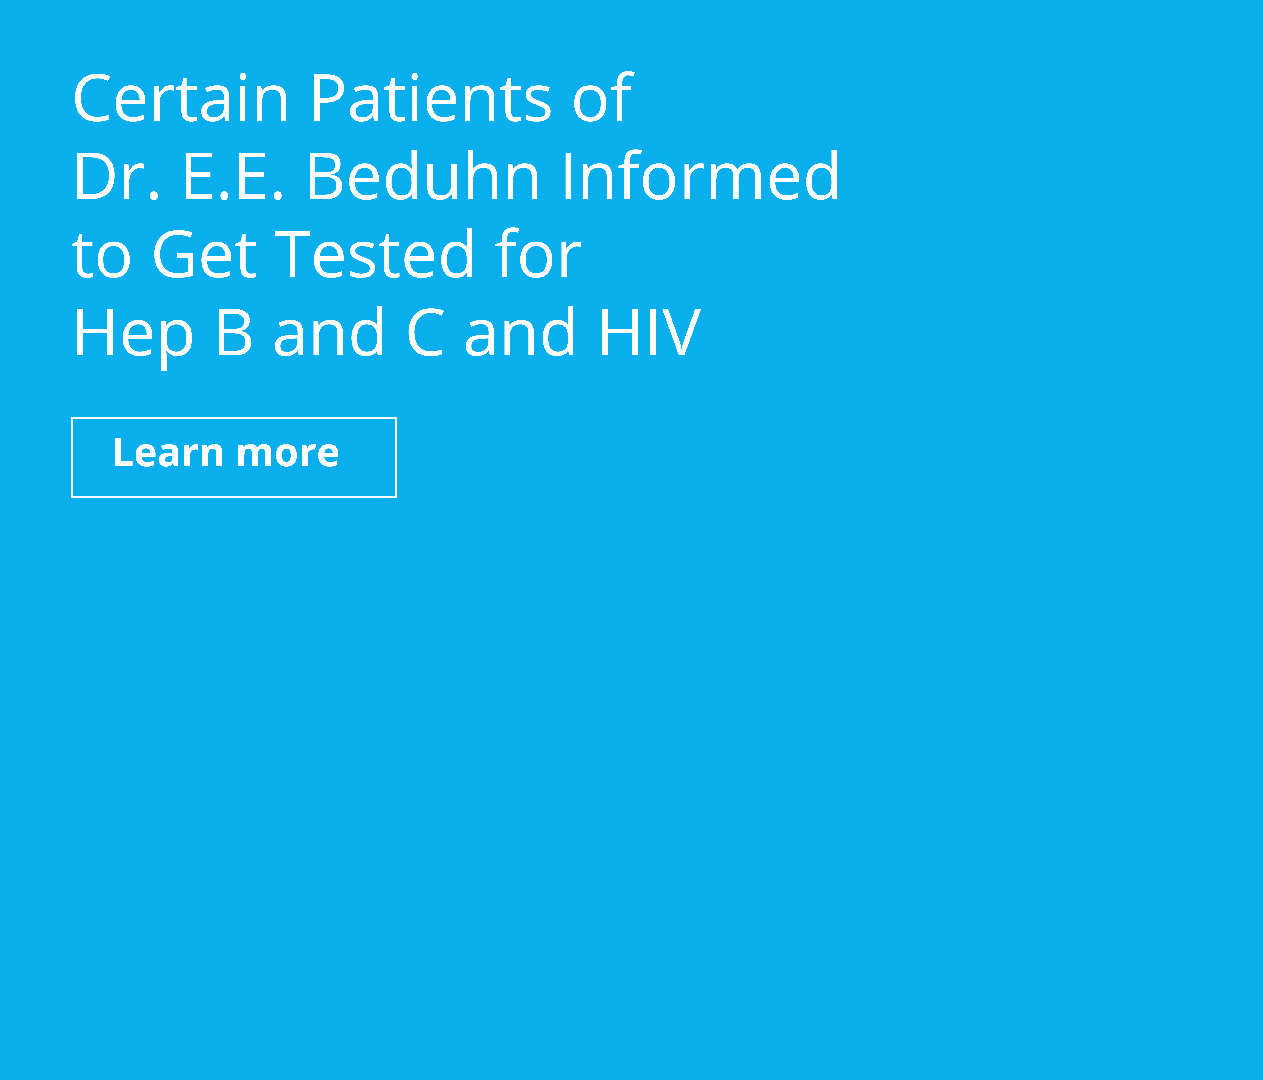 Certain Patients of Dr. E.E. Beduhn Informed to Get Tested for Hep B and C and HIV